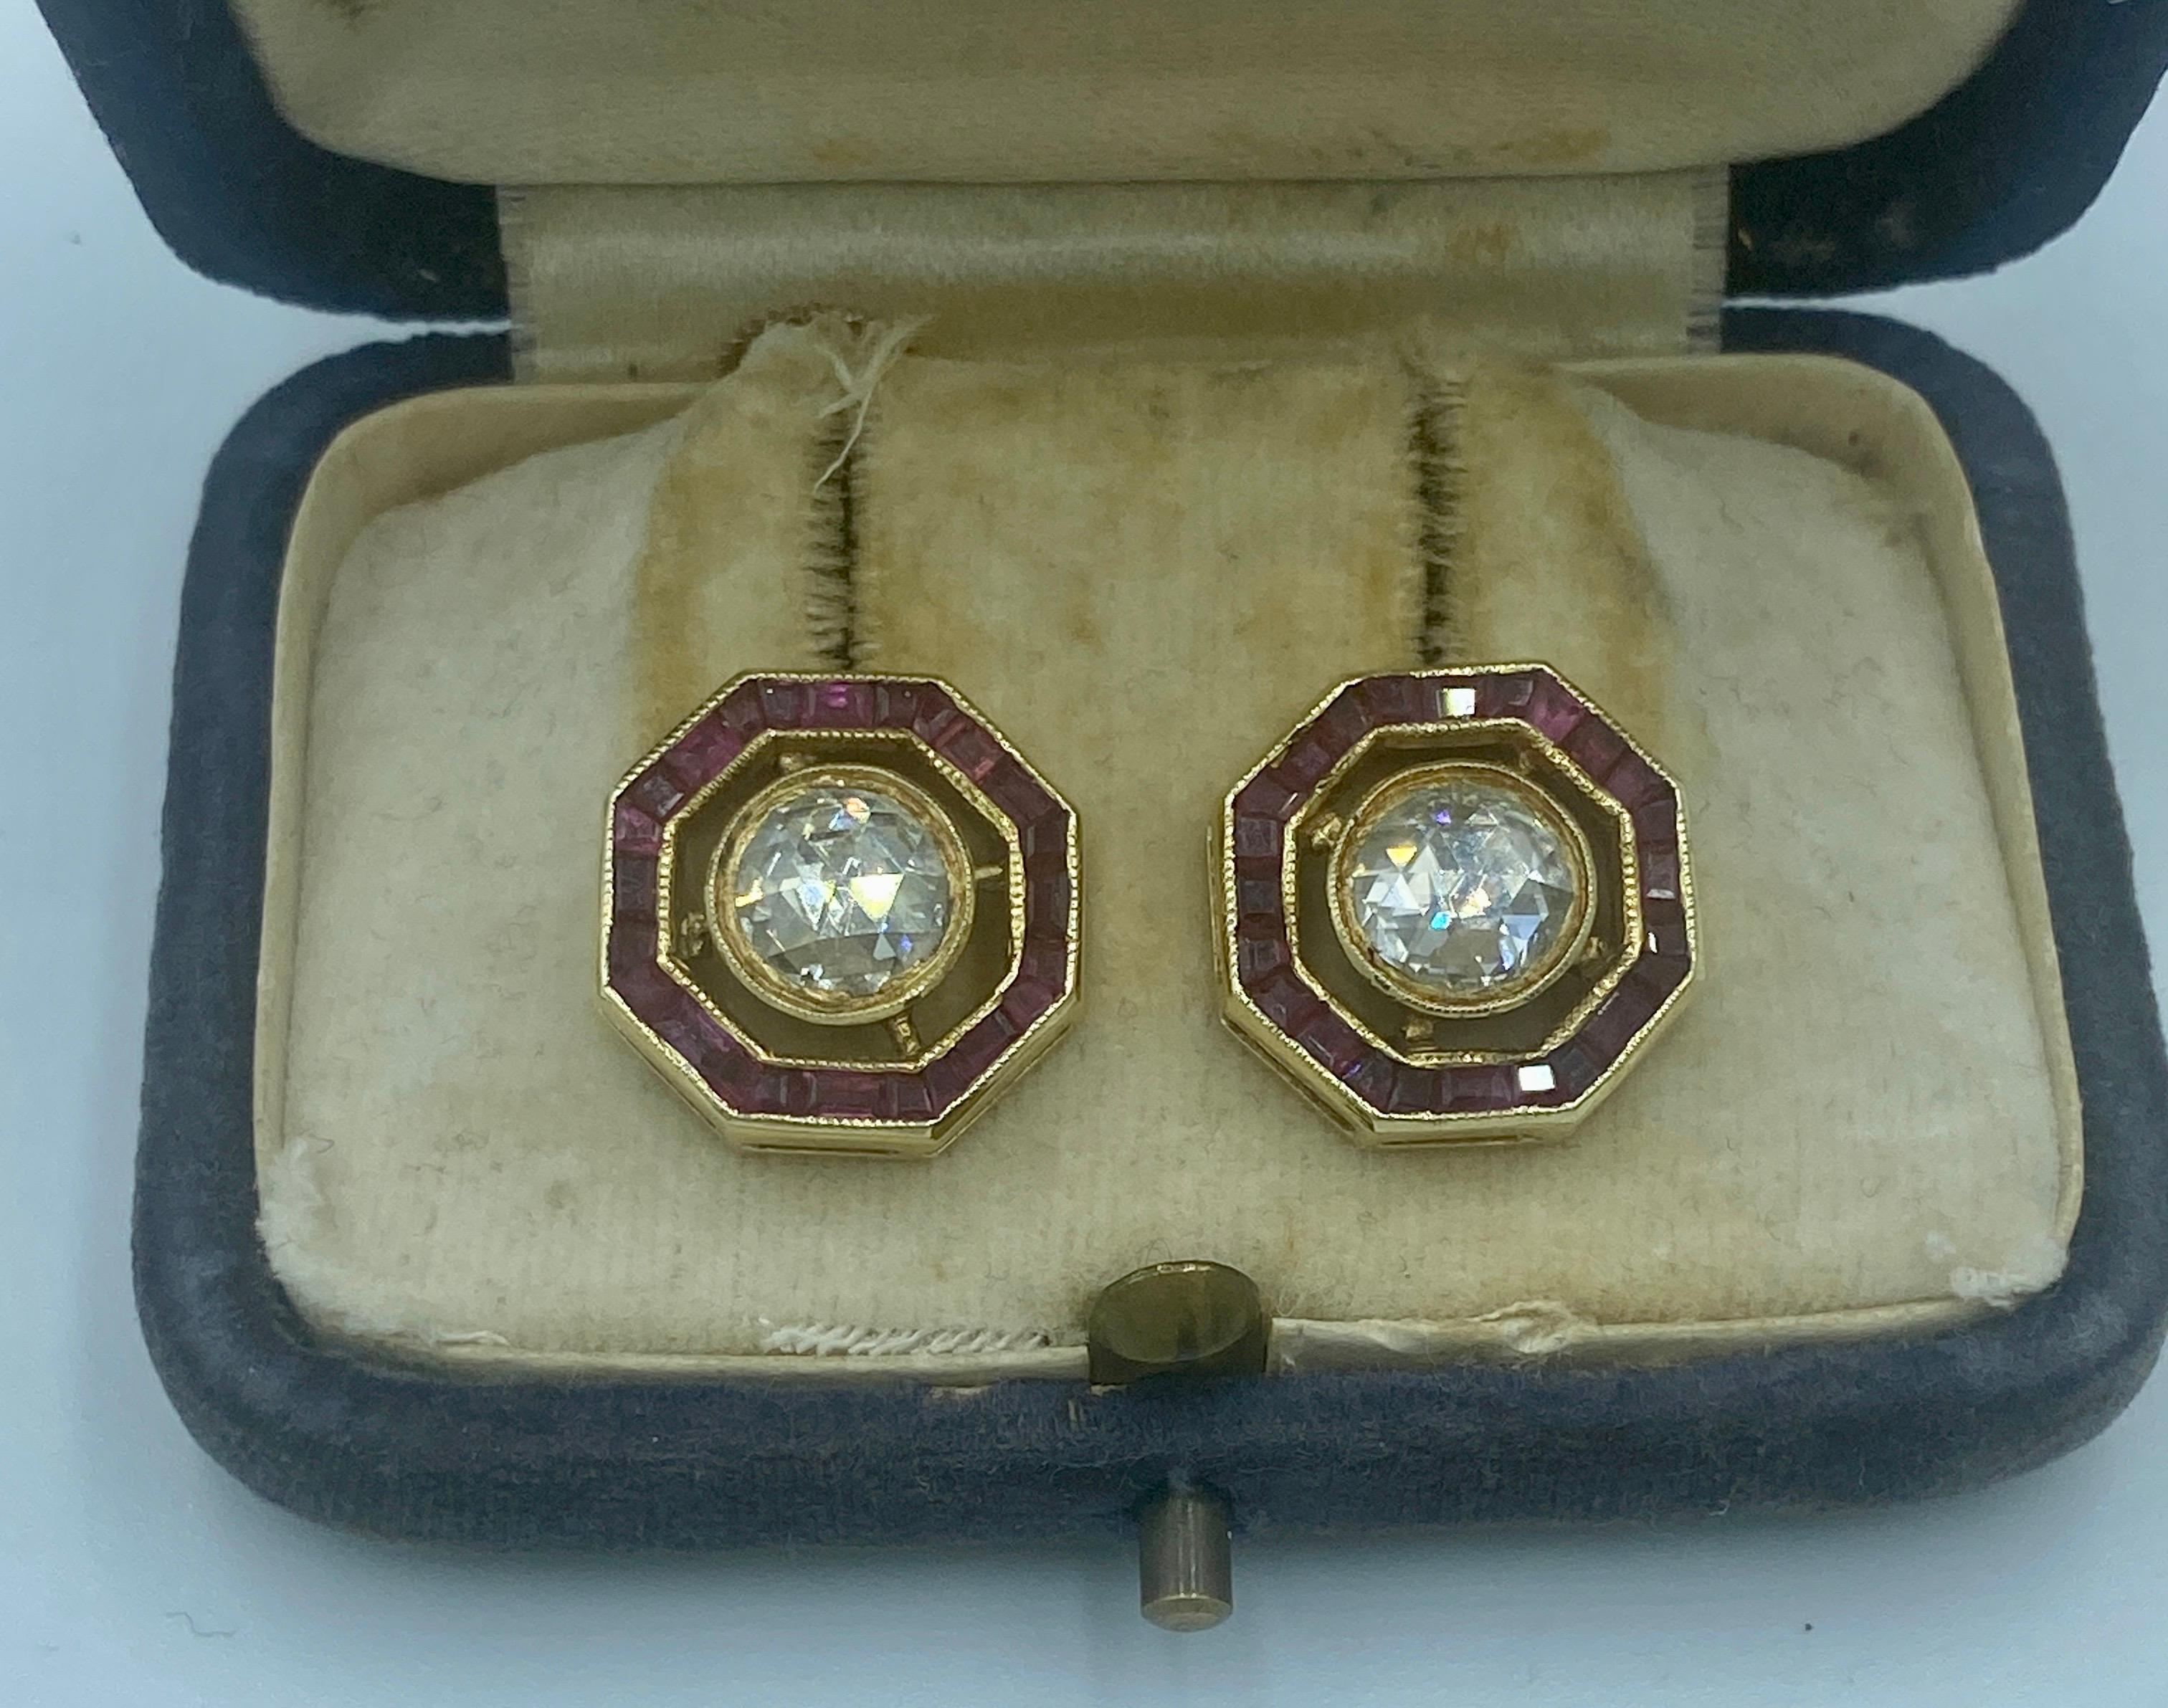 These 1940s Art Deco studs are centered around 2 beautiful rose cut diamonds of approximately 0.75 carats each. The studs are adorned with a hexagonal frame of rubies. 